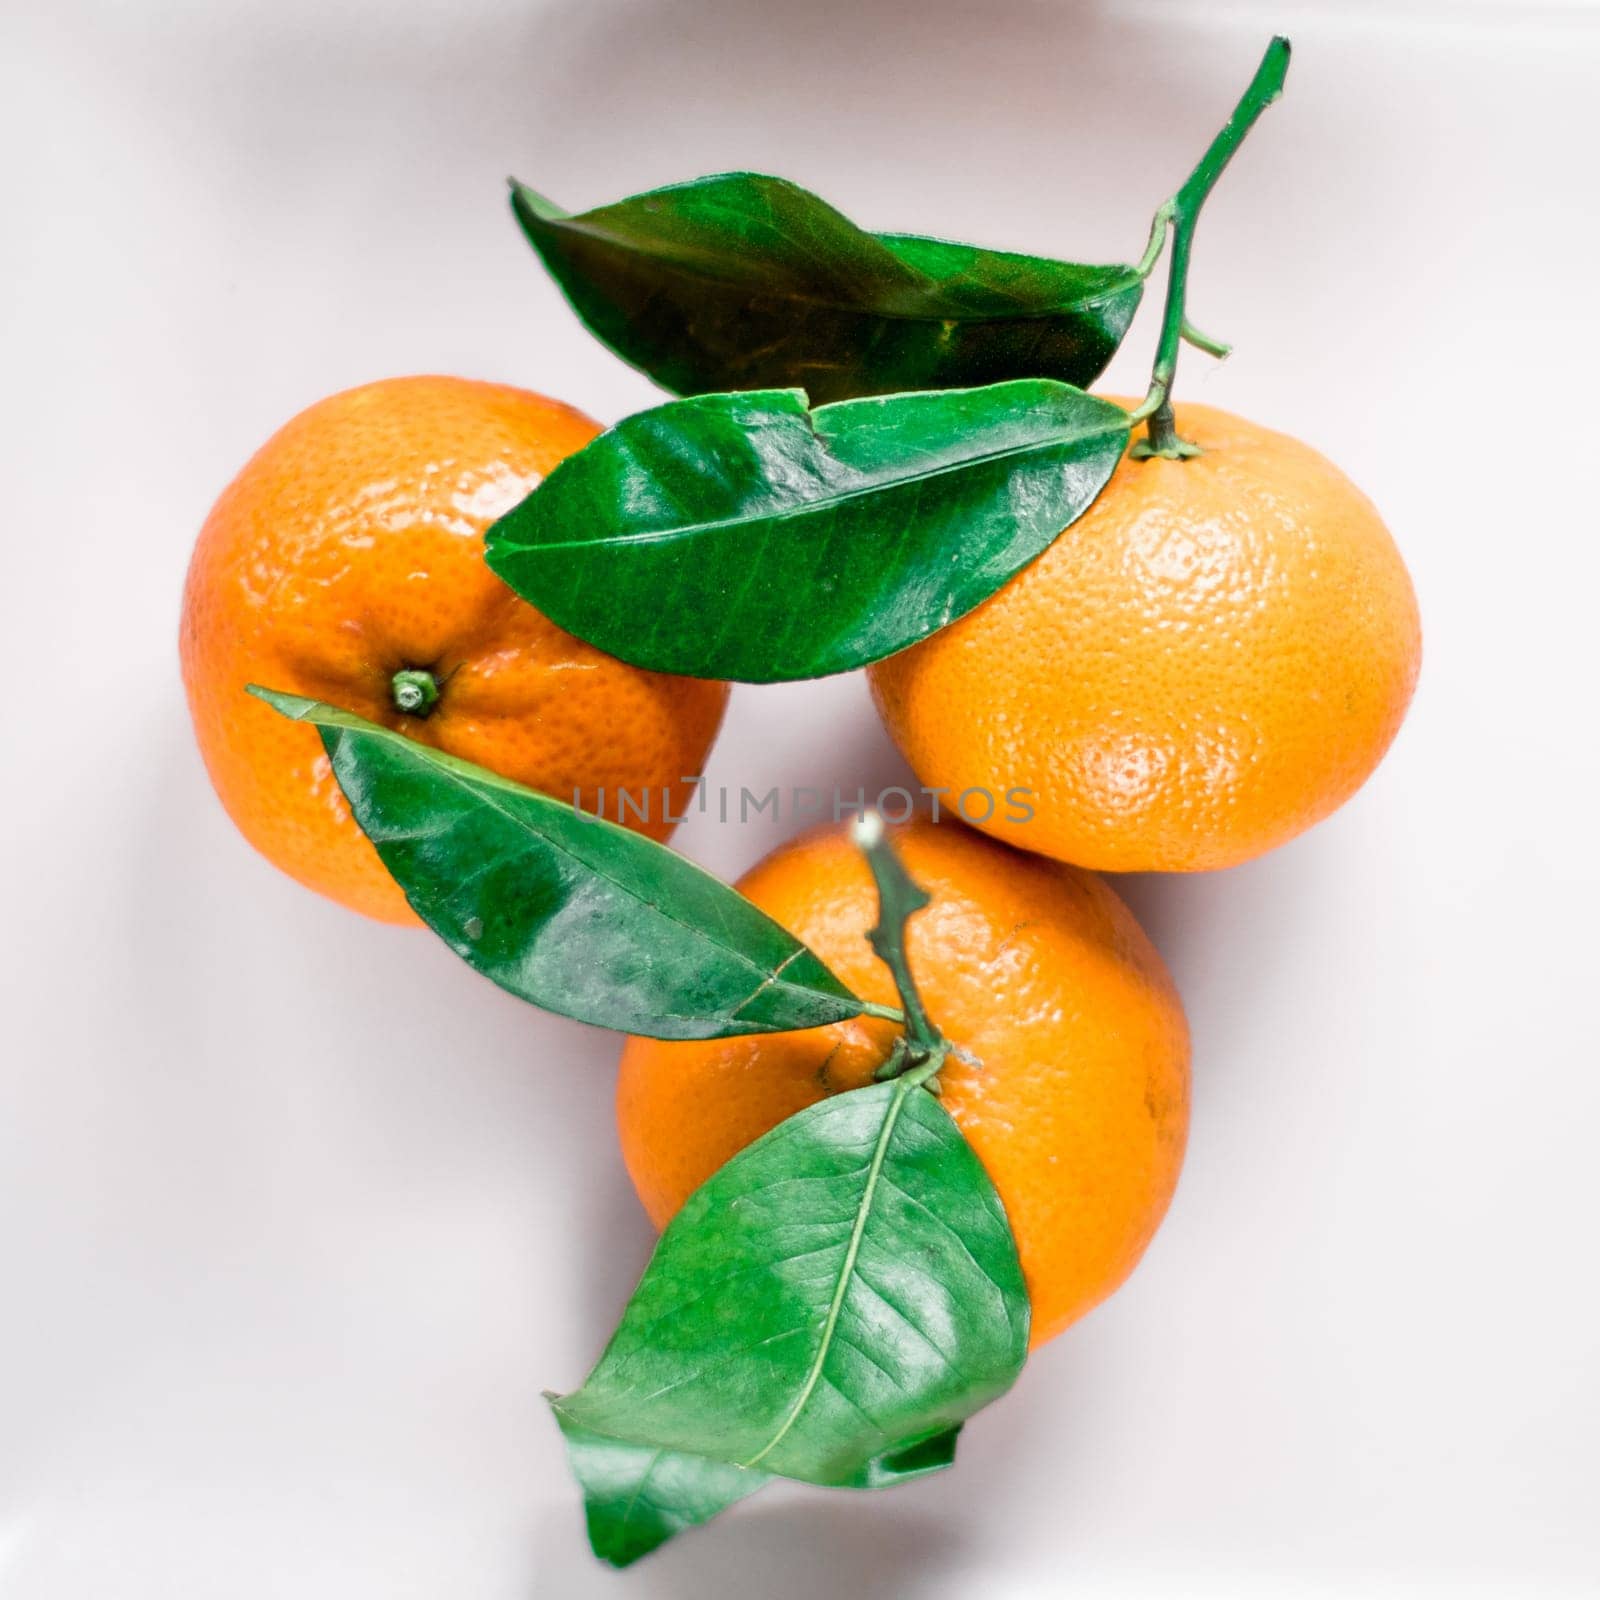 Tangerines with leaves on plate - citrus fruits and healthy eating flatlay styled concept